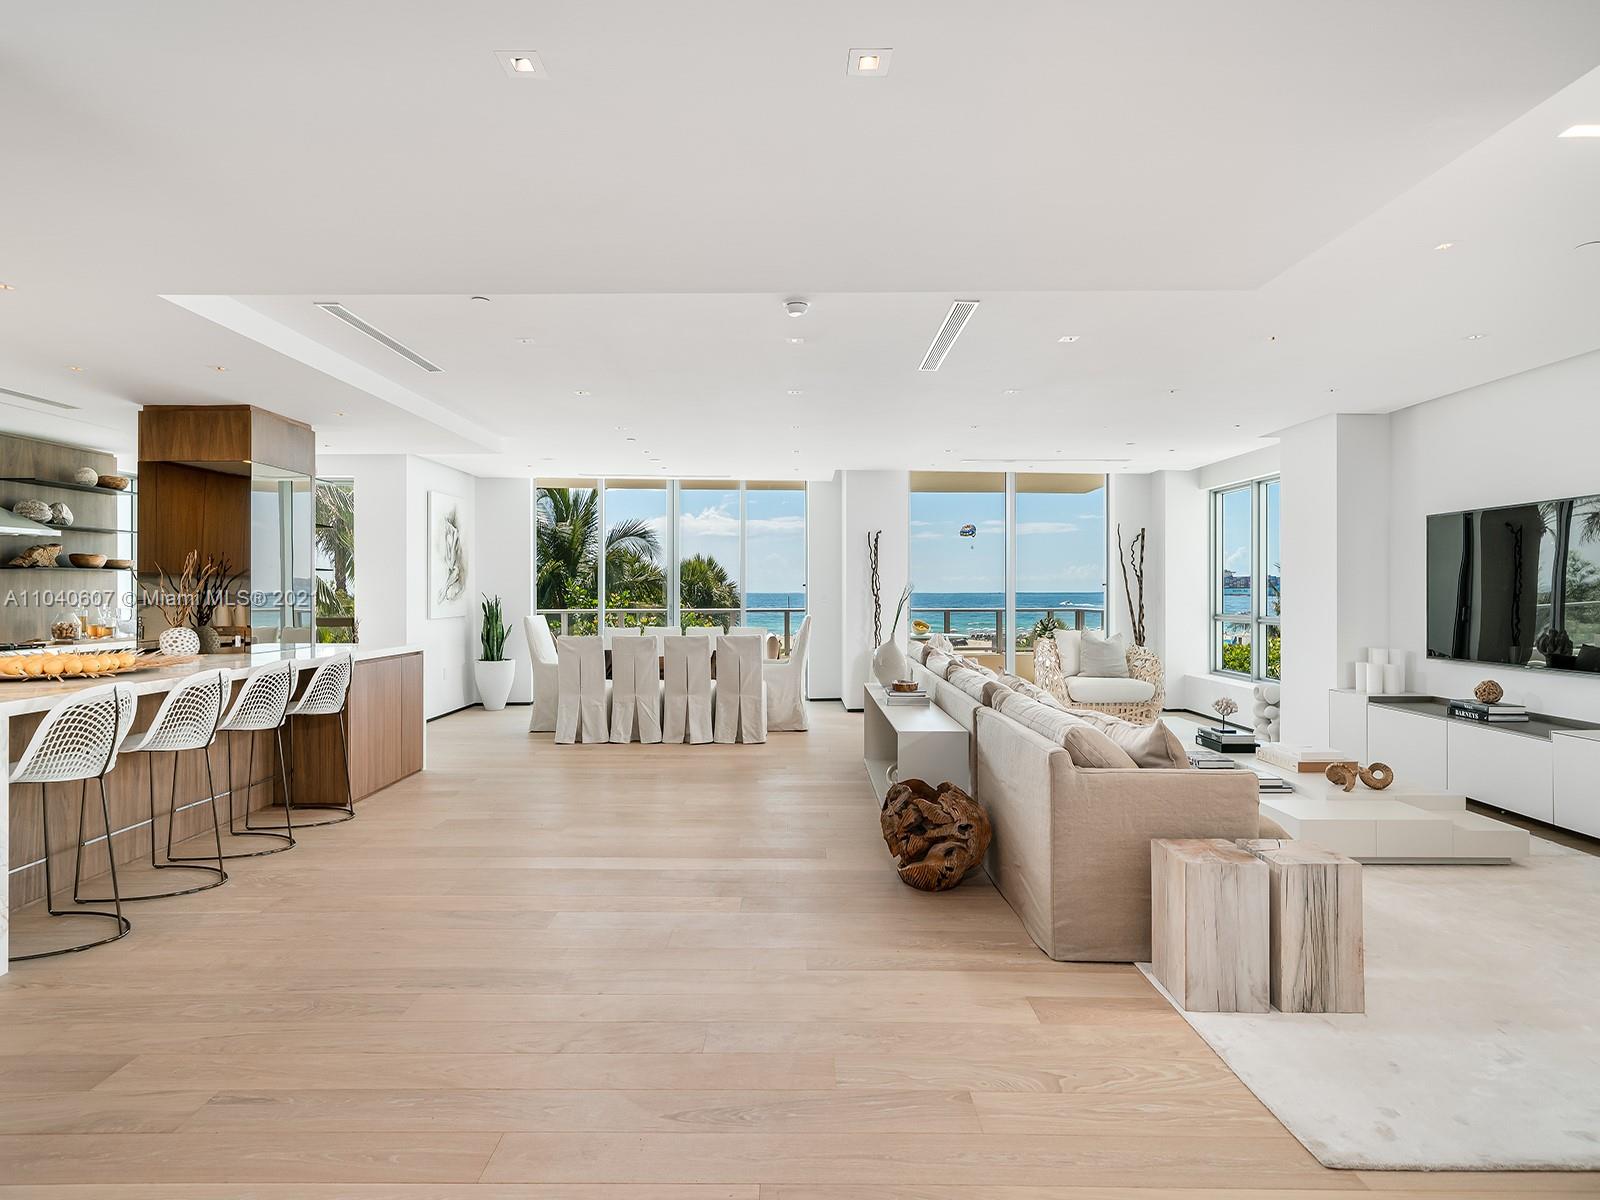 This exquisite residence at Ocean House, an ultra-high-end boutique address in Miami Beach’s coveted South-of-Fifth enclave, offers privacy, luxury, and spectacular ocean views. Recently renovated, the sprawling 4,068 square foot, four-bed, and four-and-a-half-bath home includes a luxurious master suite with a dressing room and spa-like bathroom. No detail has been overlooked, including the private elevator entry, large balconies, massive great room, Crestron smart home system, and the option to be delivered turnkey and fully furnished by Artefacto. Enjoy an extensive roster of amenities, including stunning common areas designed by Antrobus + Ramirez, screening and billiards rooms, a state-of-the-art fitness center, poolside cabanas, a serviced beach, and a private hair salon.